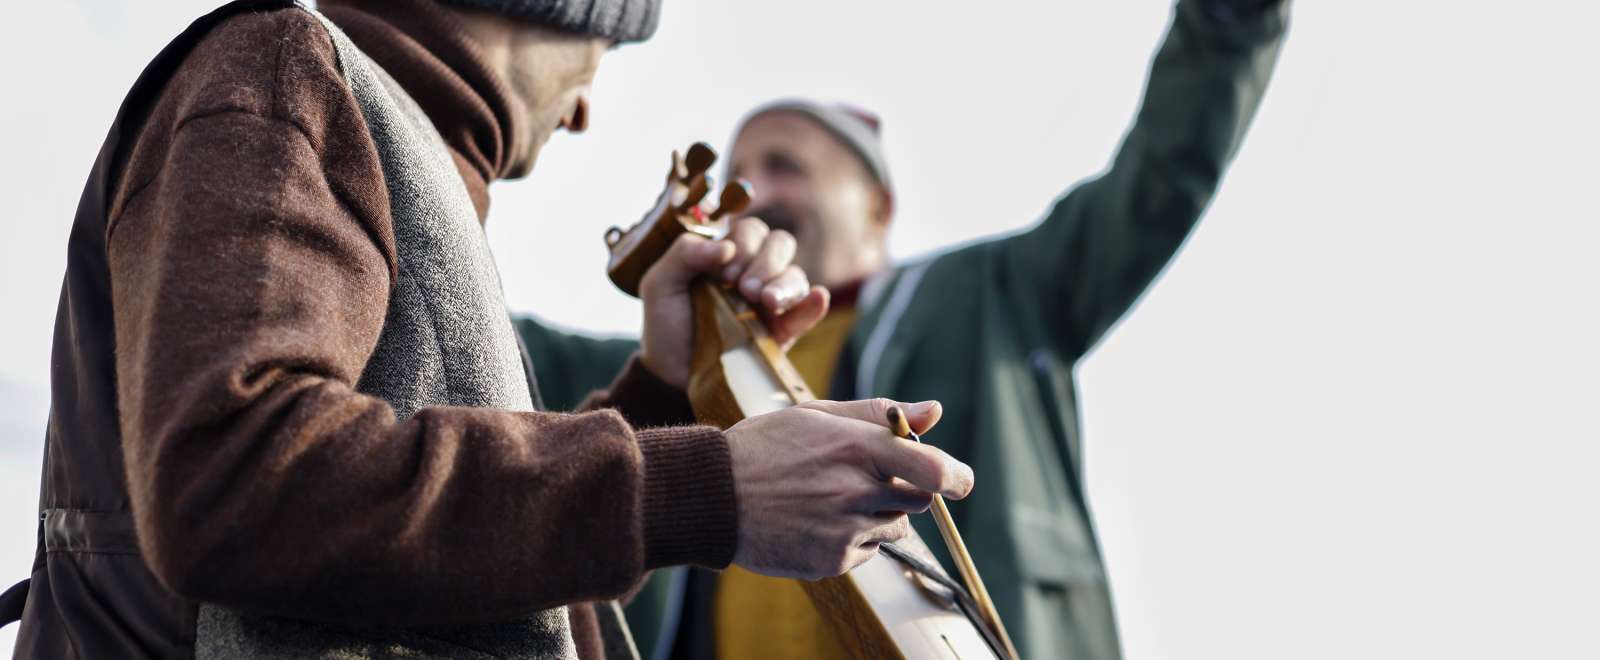 Musicians playing instruments outdoors